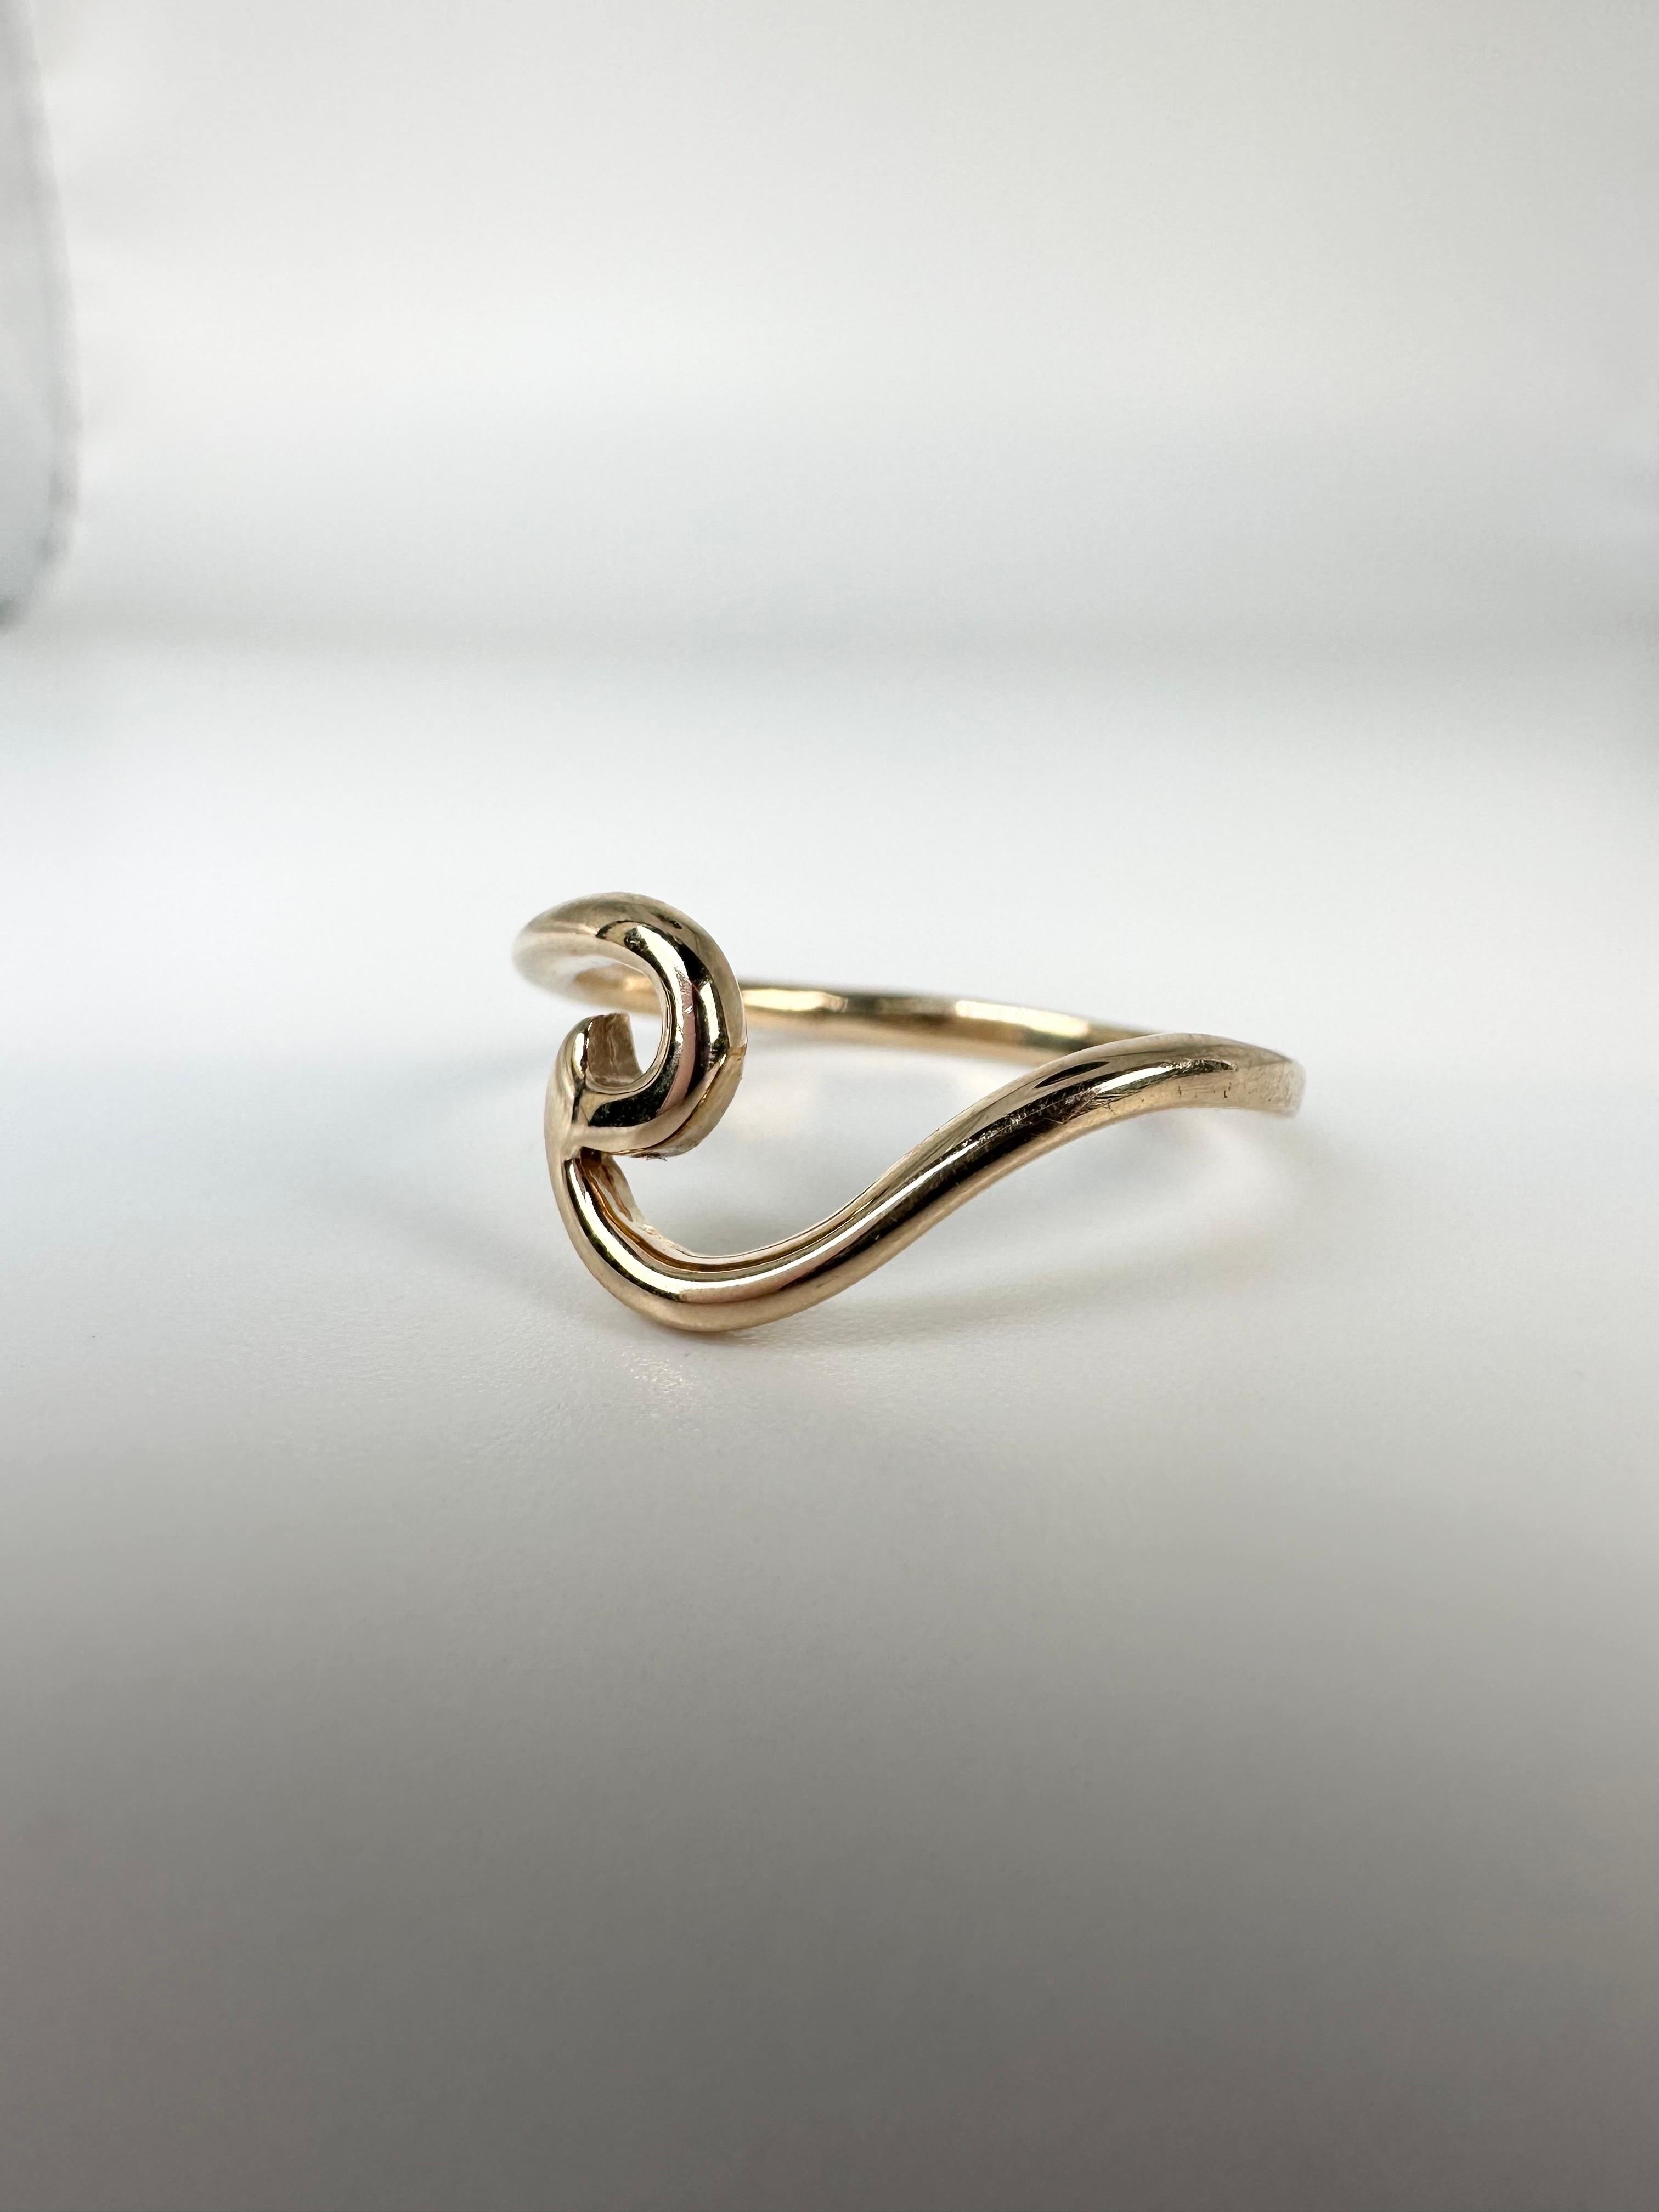 Wave ring Ocean ring 14KT yellow gold ring Florida California Beaches ring In New Condition For Sale In Jupiter, FL